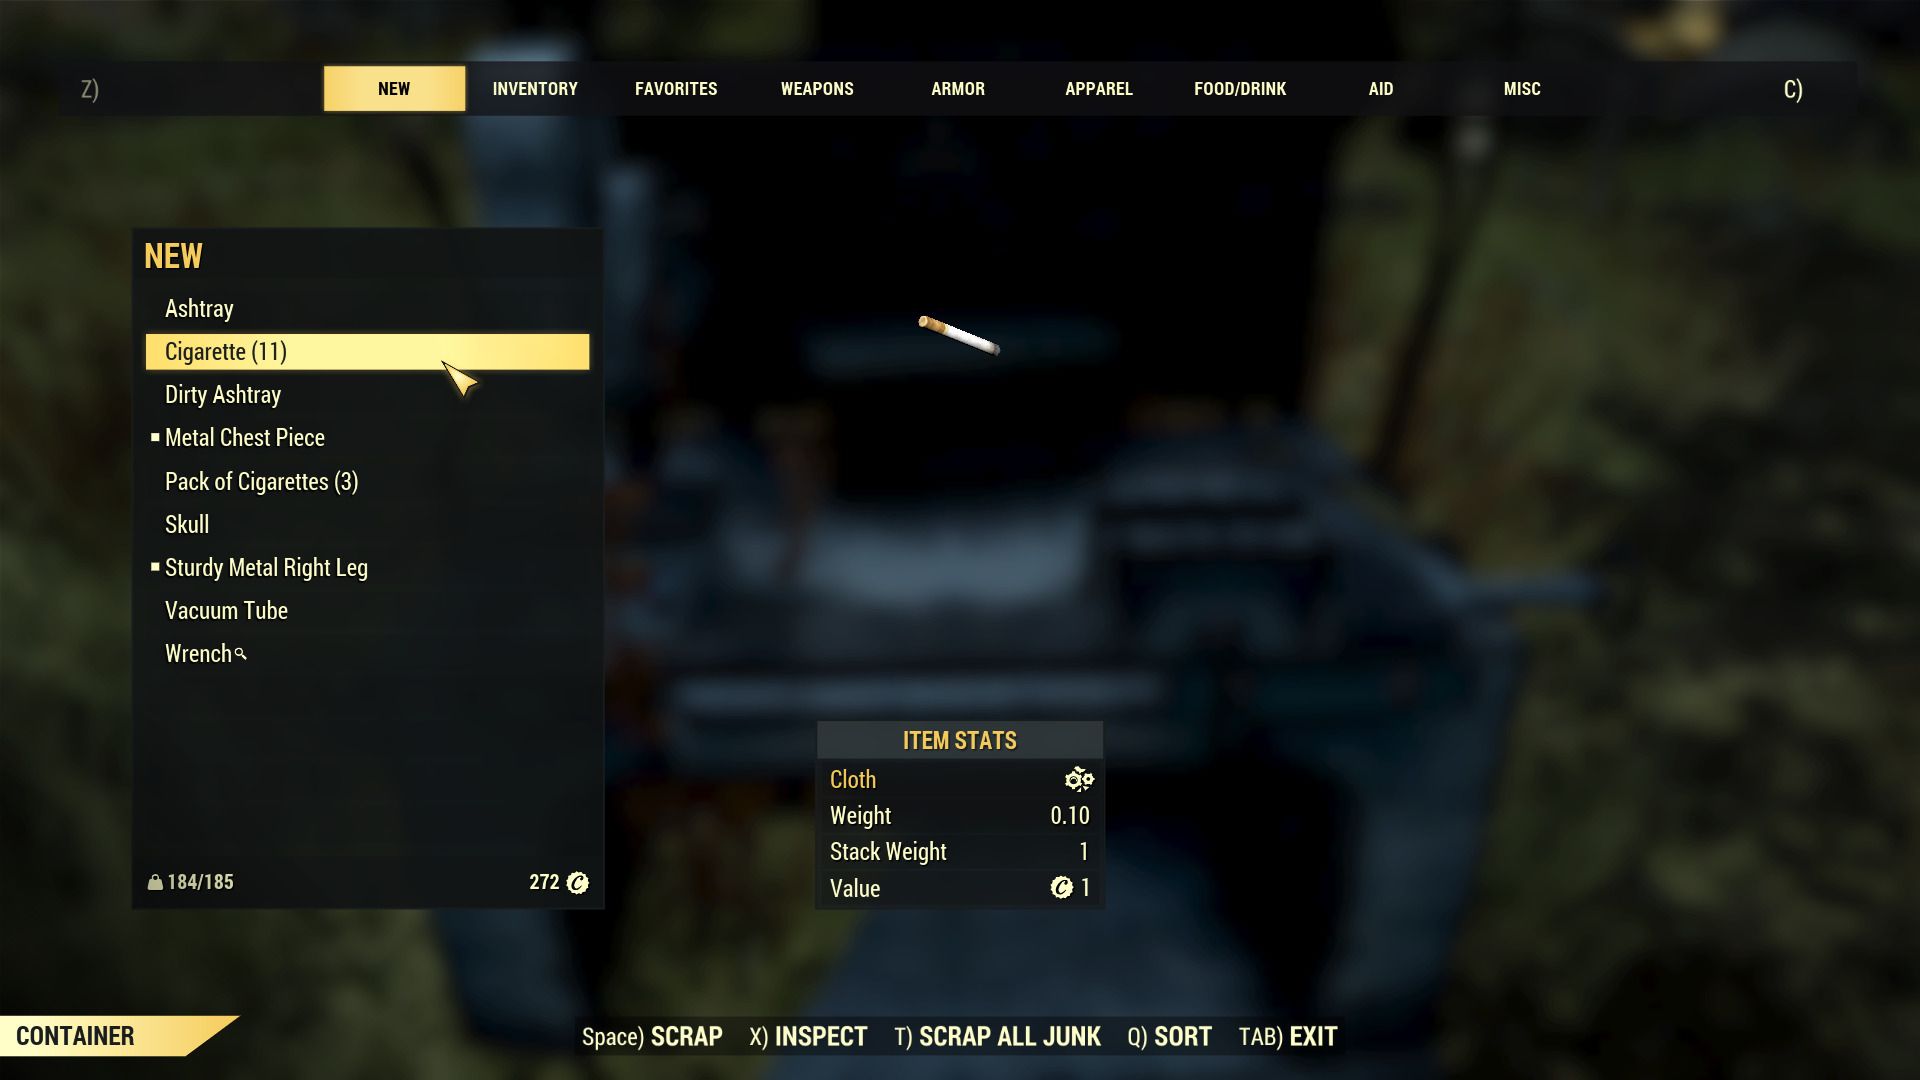 Image of cigarettes in inventory in Fallout 76